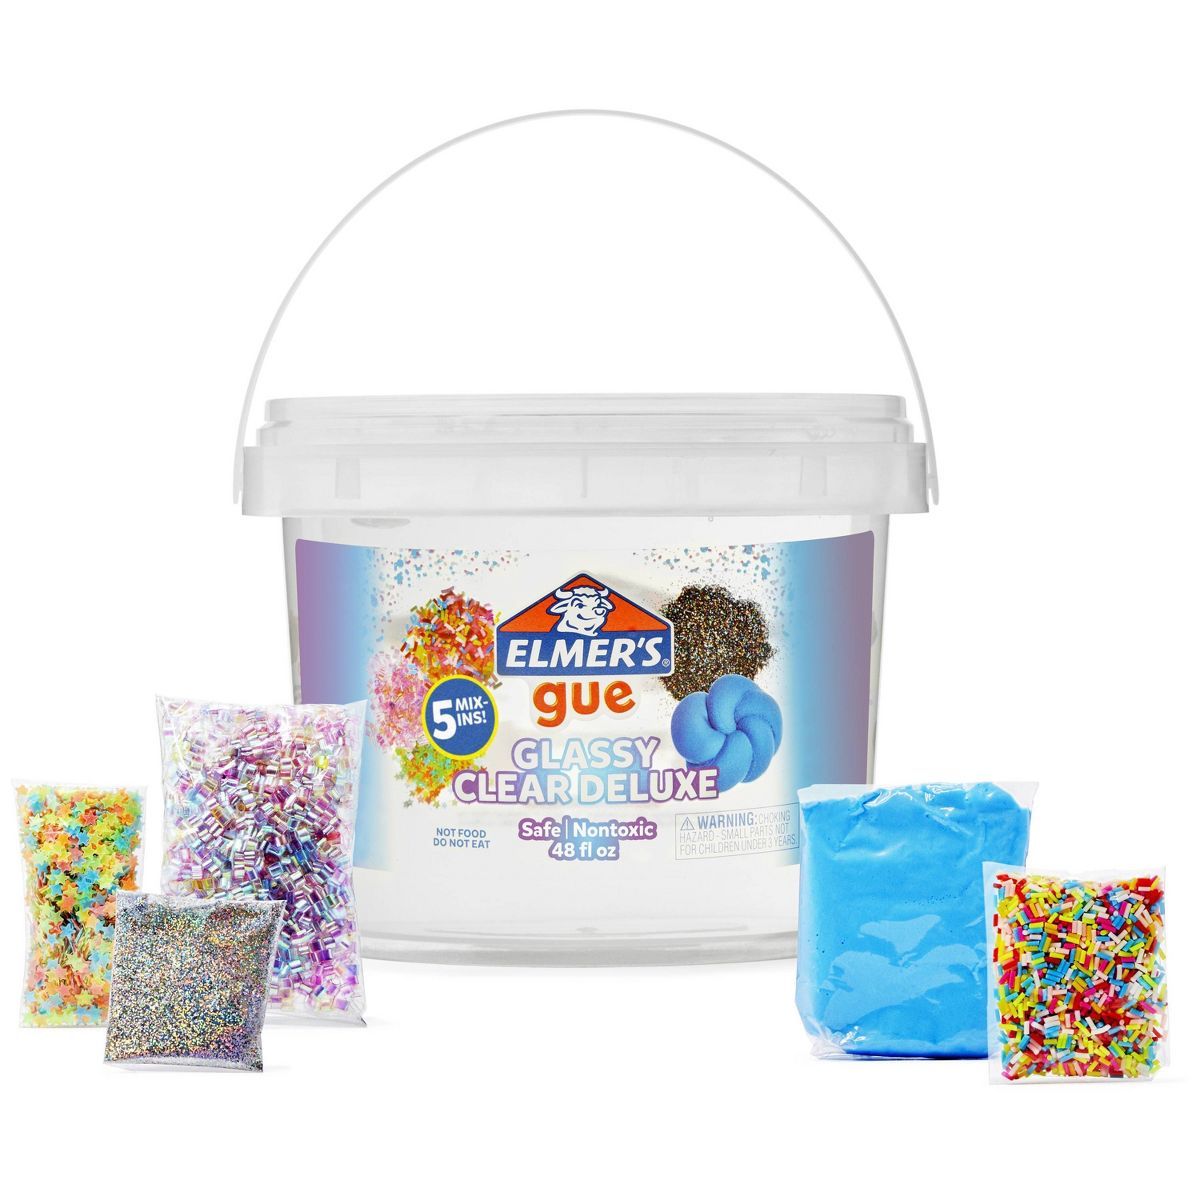 Elmer's Gue 3lb Glassy Clear Deluxe Premade Slime Kit with Mix-Ins | Target